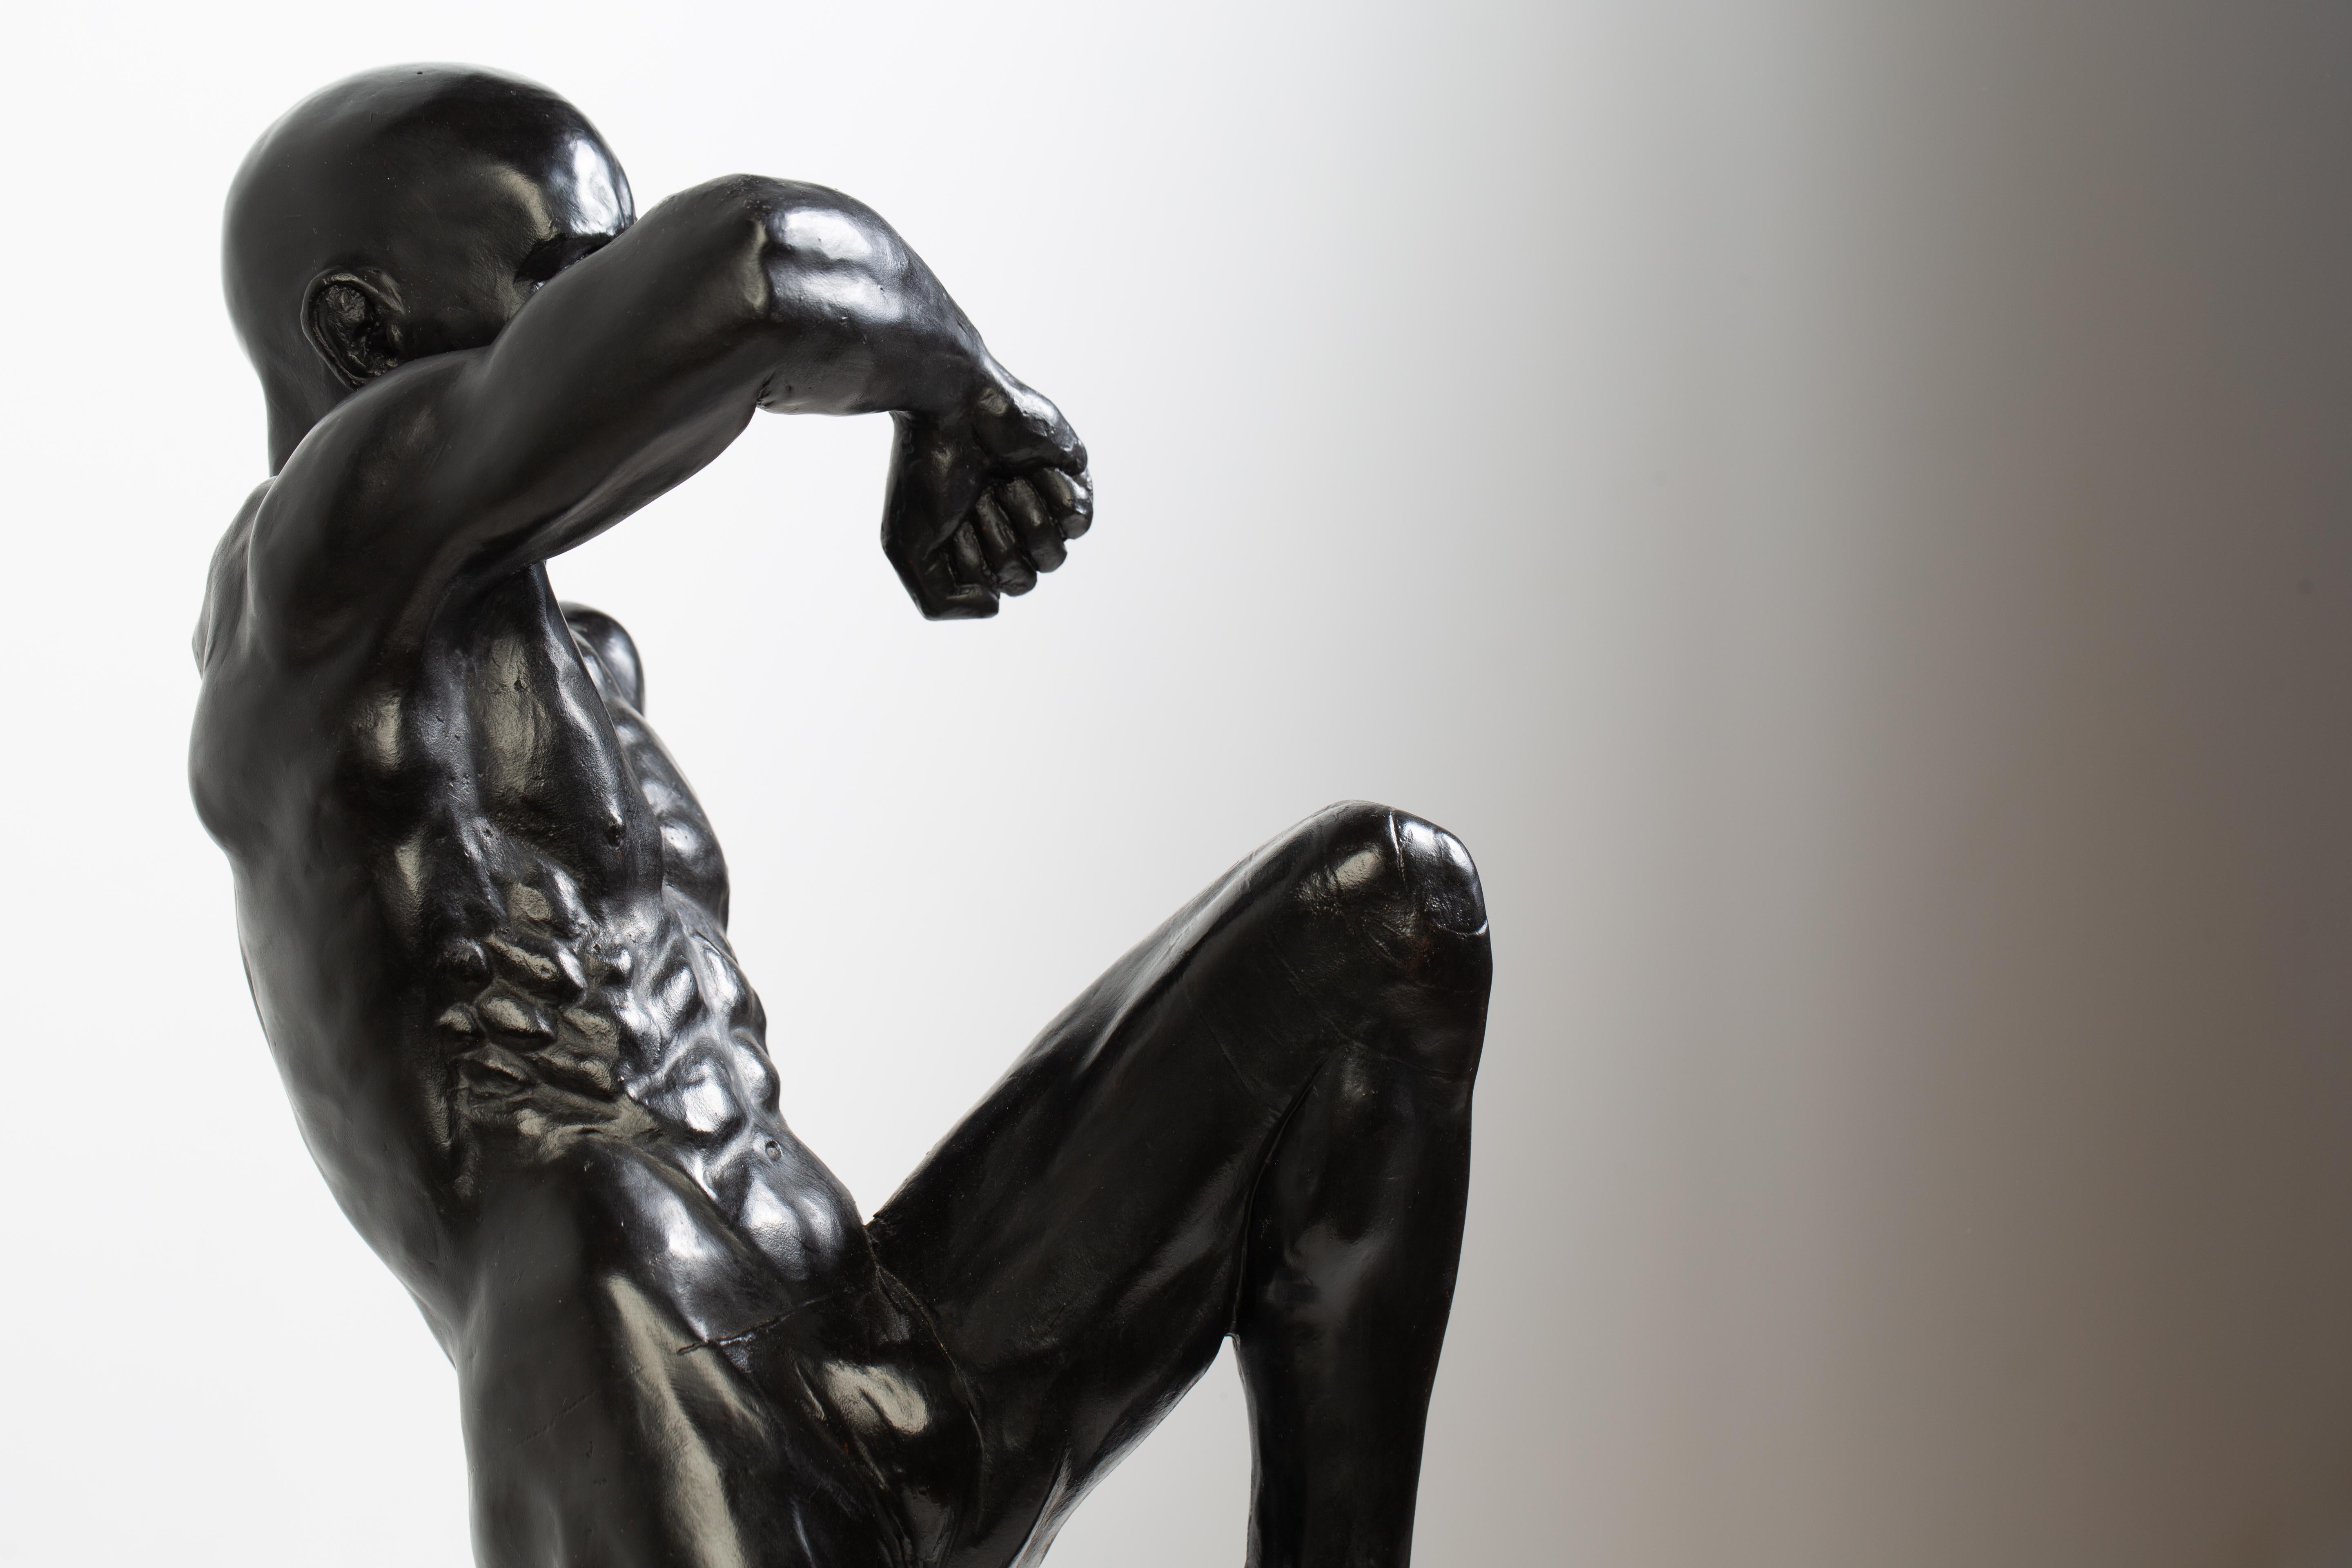 This Impact - Contemporary Bronze Nude Male Sculpture in Action Pose - Gold Nude Sculpture by Dean Kugler